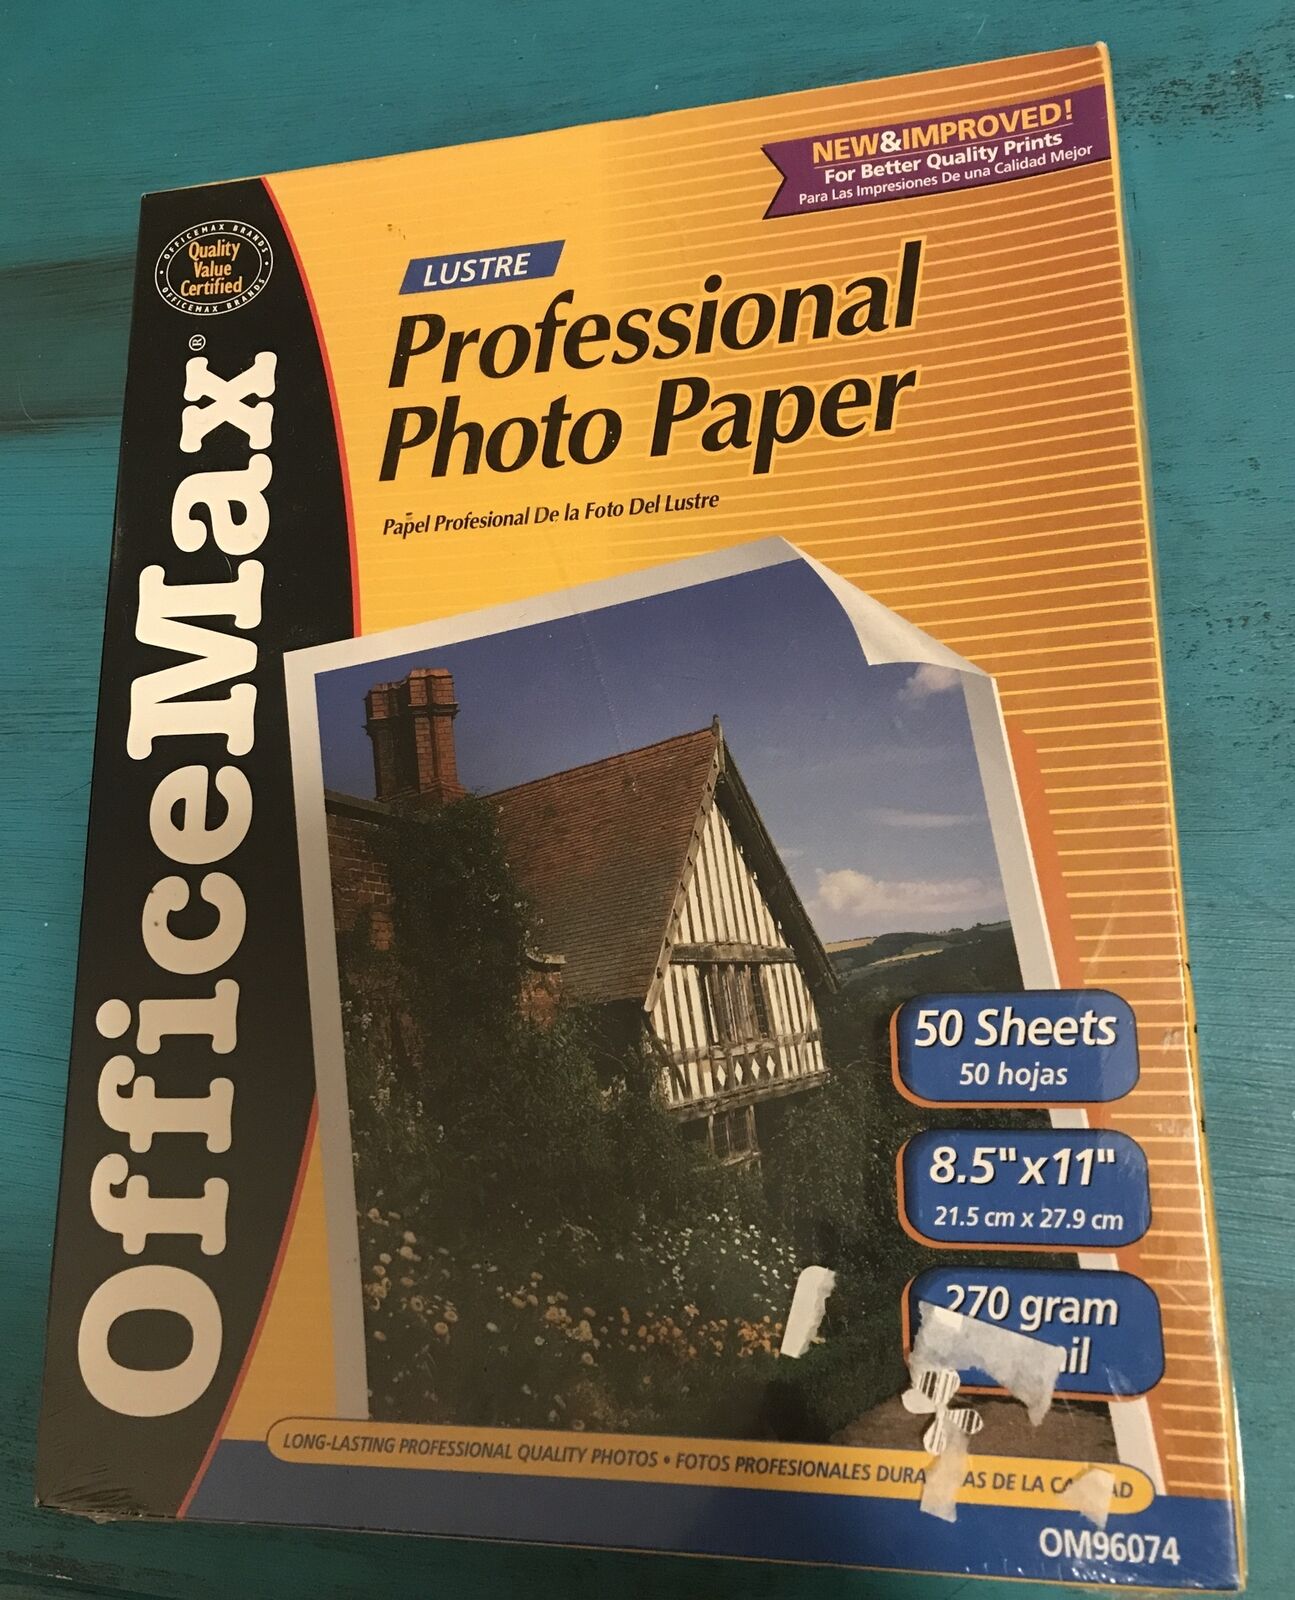 New Office Max Lustre Professional Heavyweight inkjet paper,50-sheets (8.5”x11”)